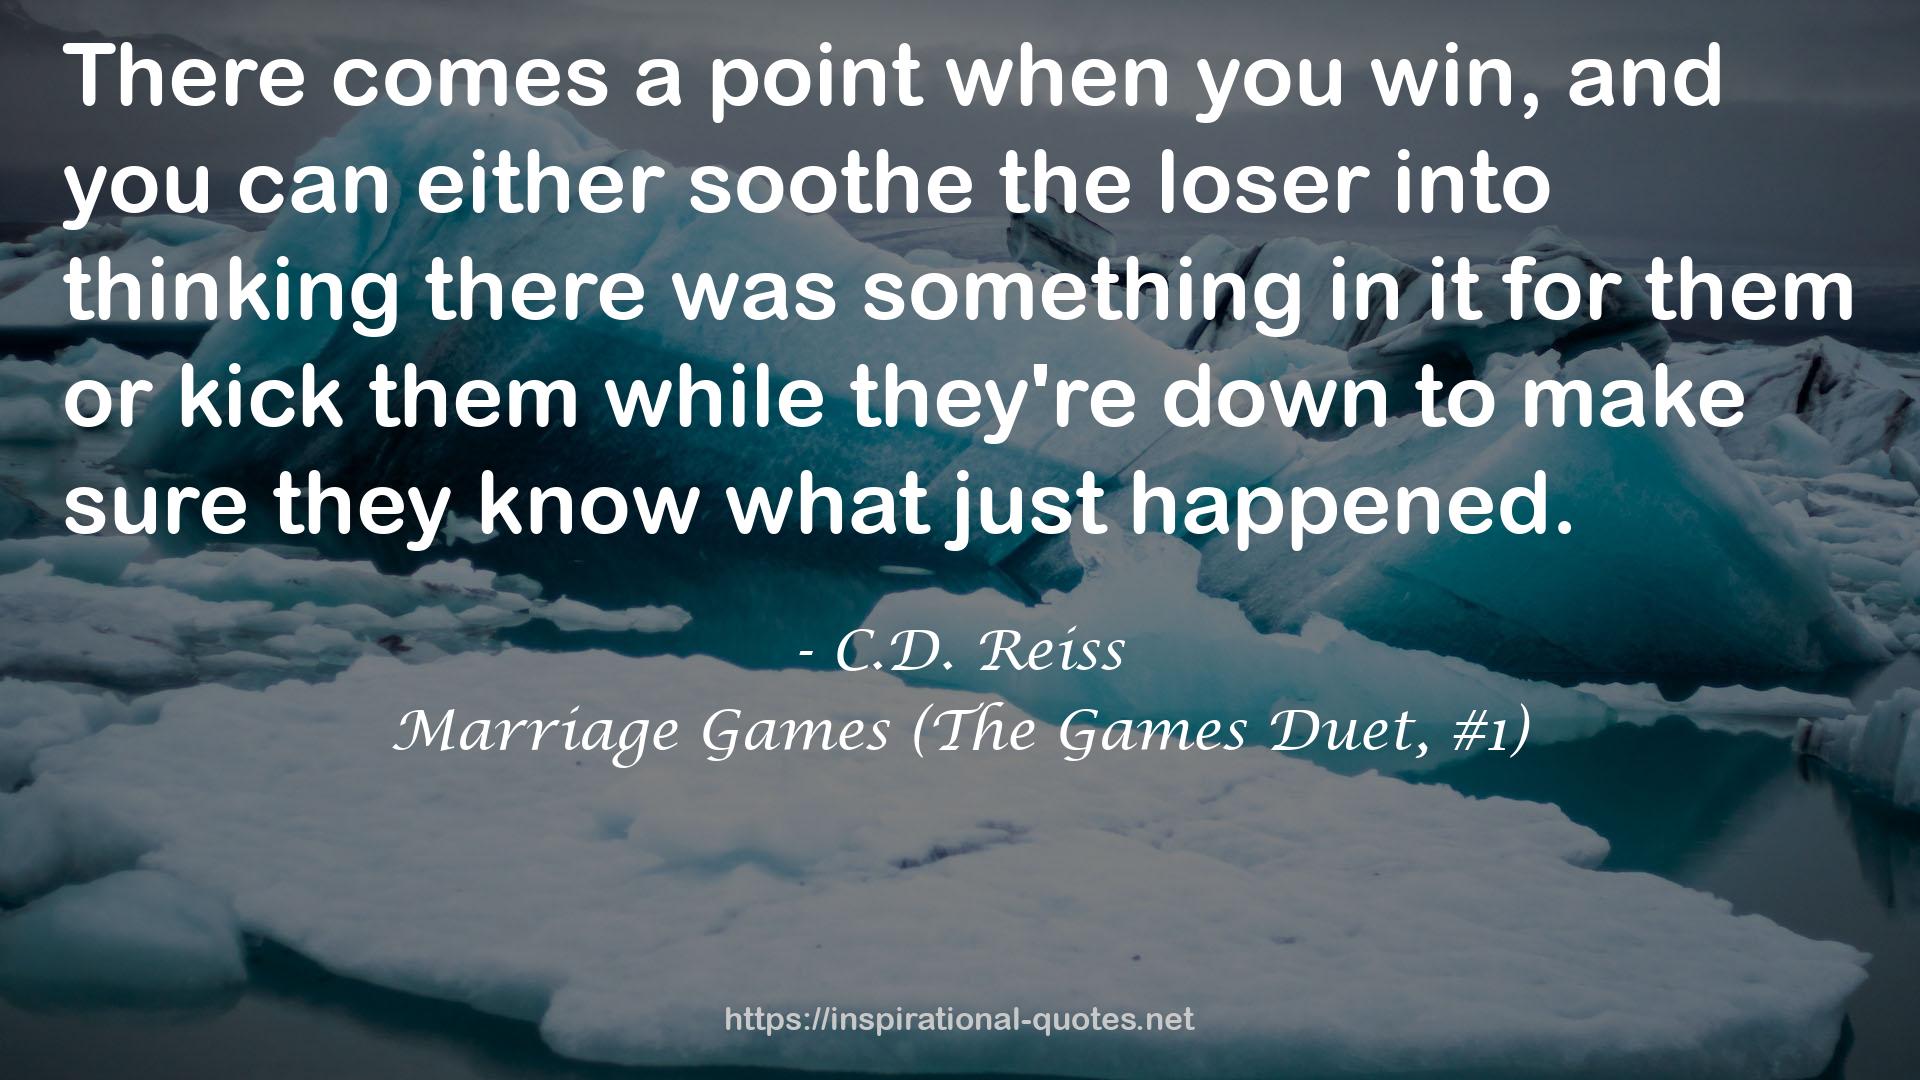 Marriage Games (The Games Duet, #1) QUOTES